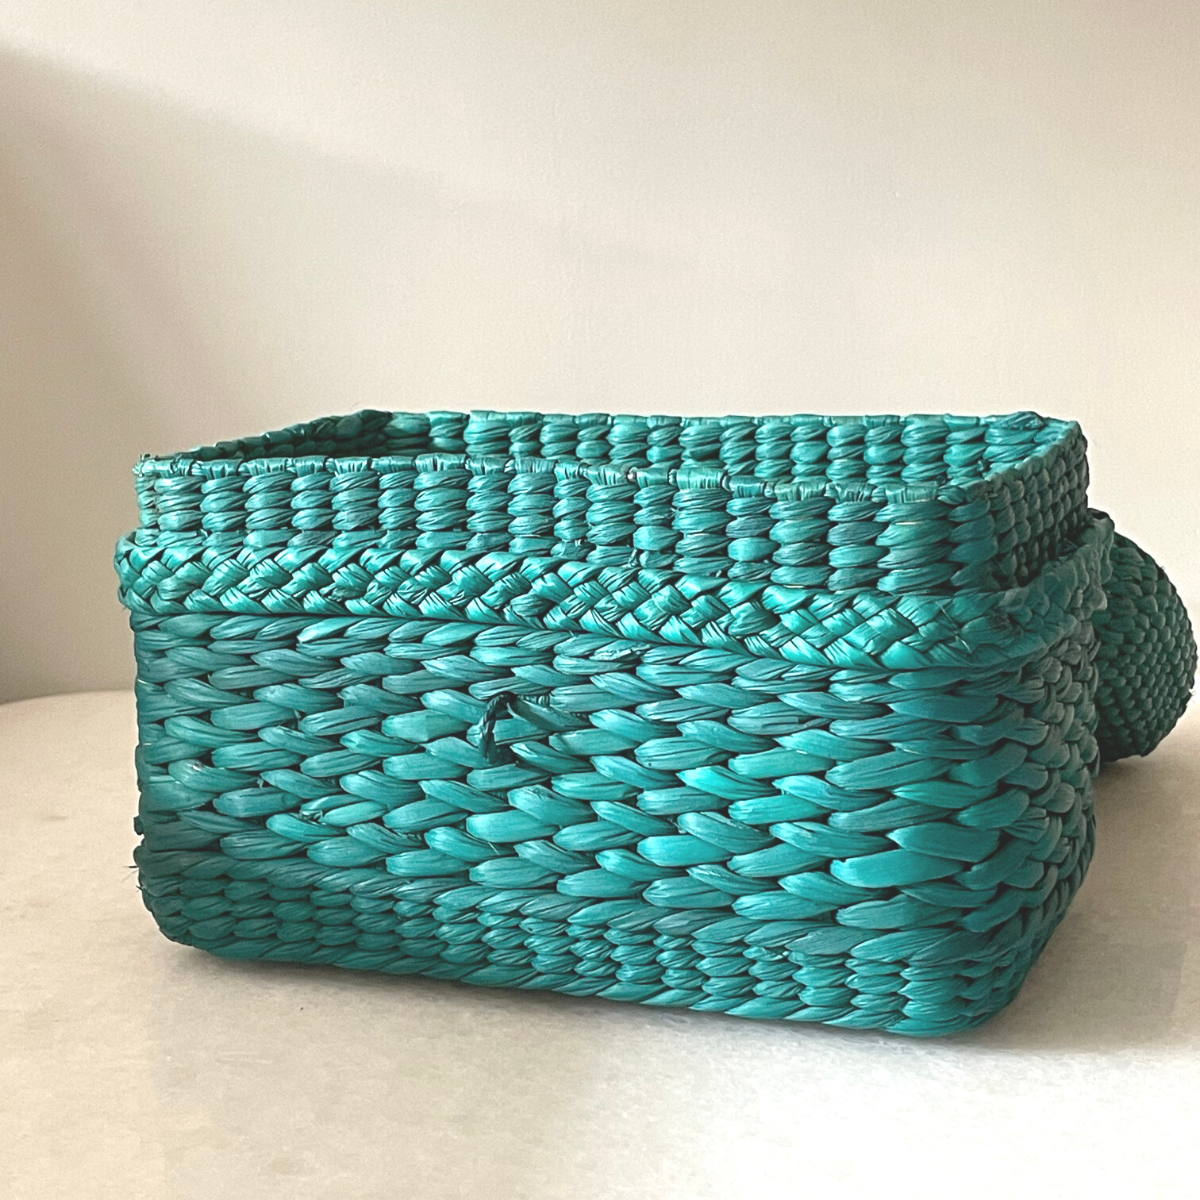 Handmade Unique Gift Box for her in Teal or Blue Green Color branded and available on online shop Saanjh India